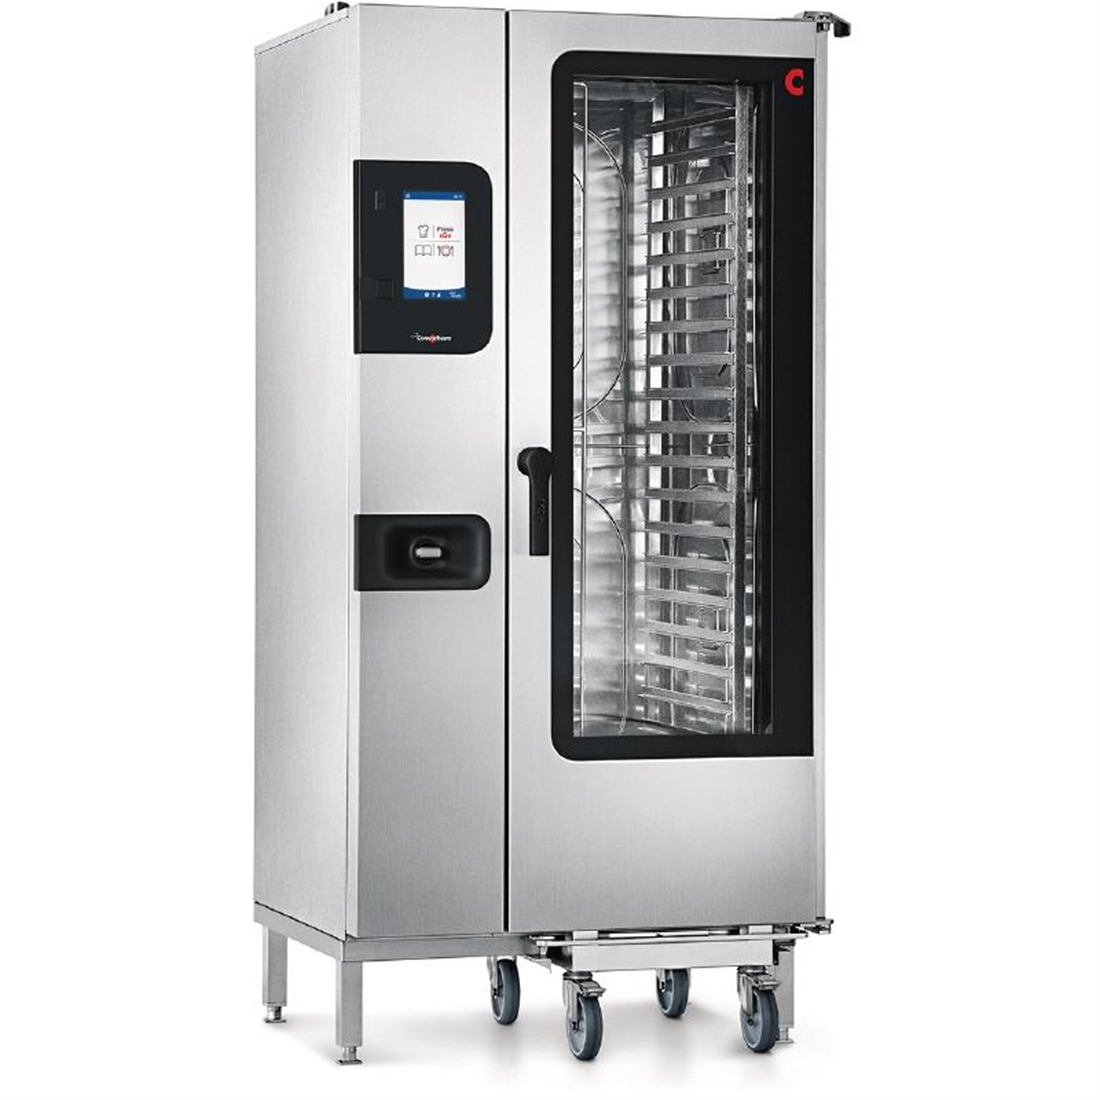 Convotherm 4 easyTouch Combi Oven 20 x 1 x1 GN Grid